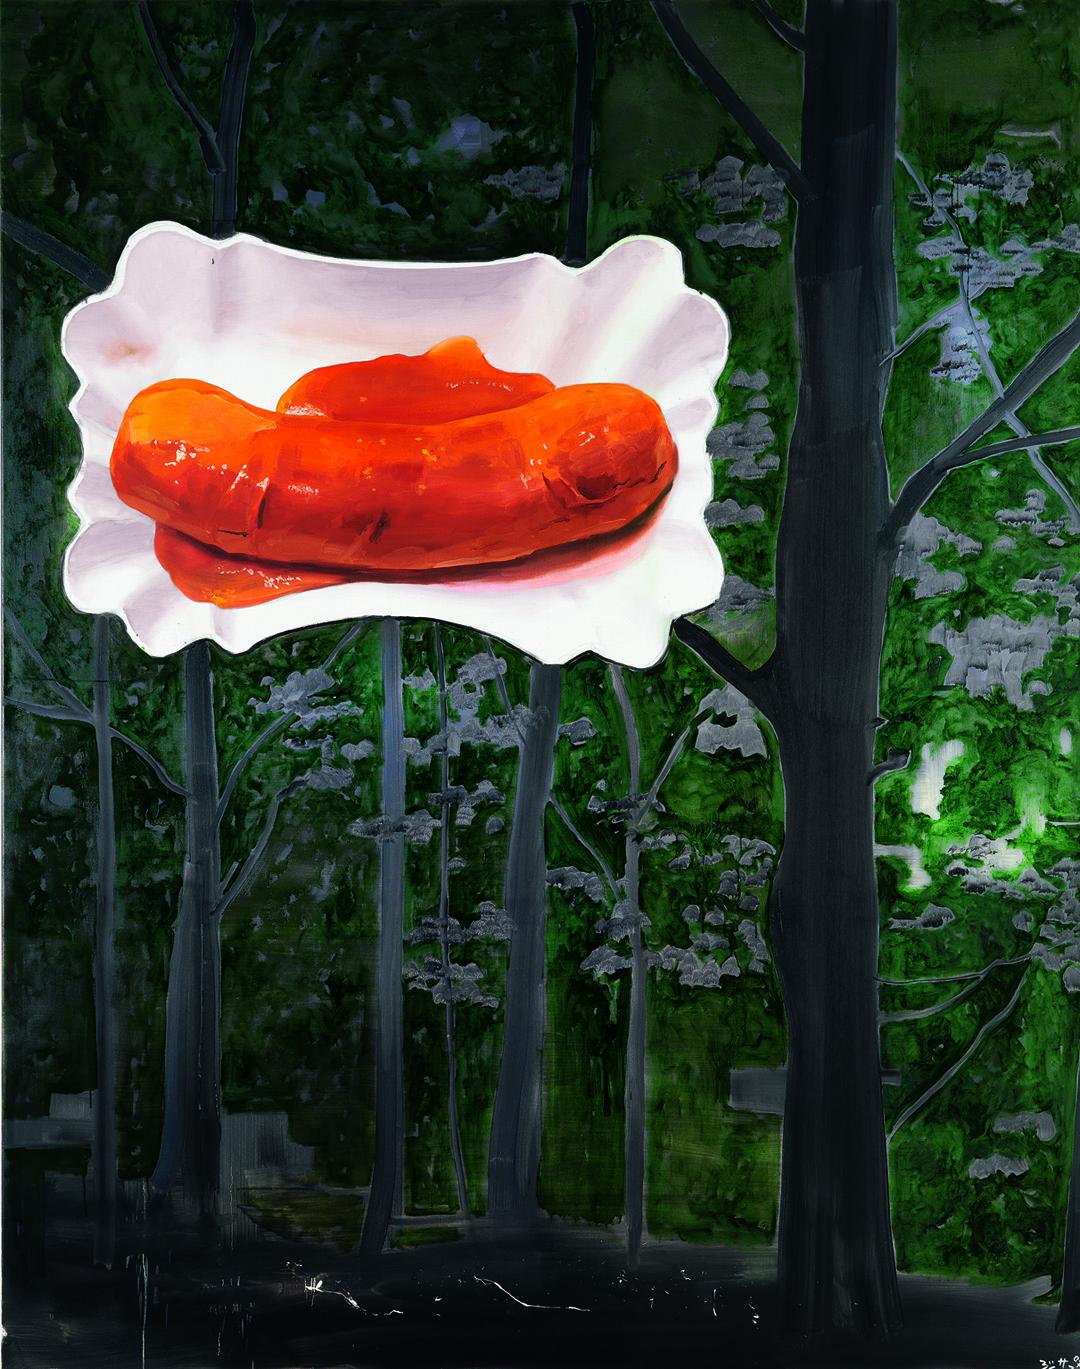 A curry sausage seems to float on top of trees.